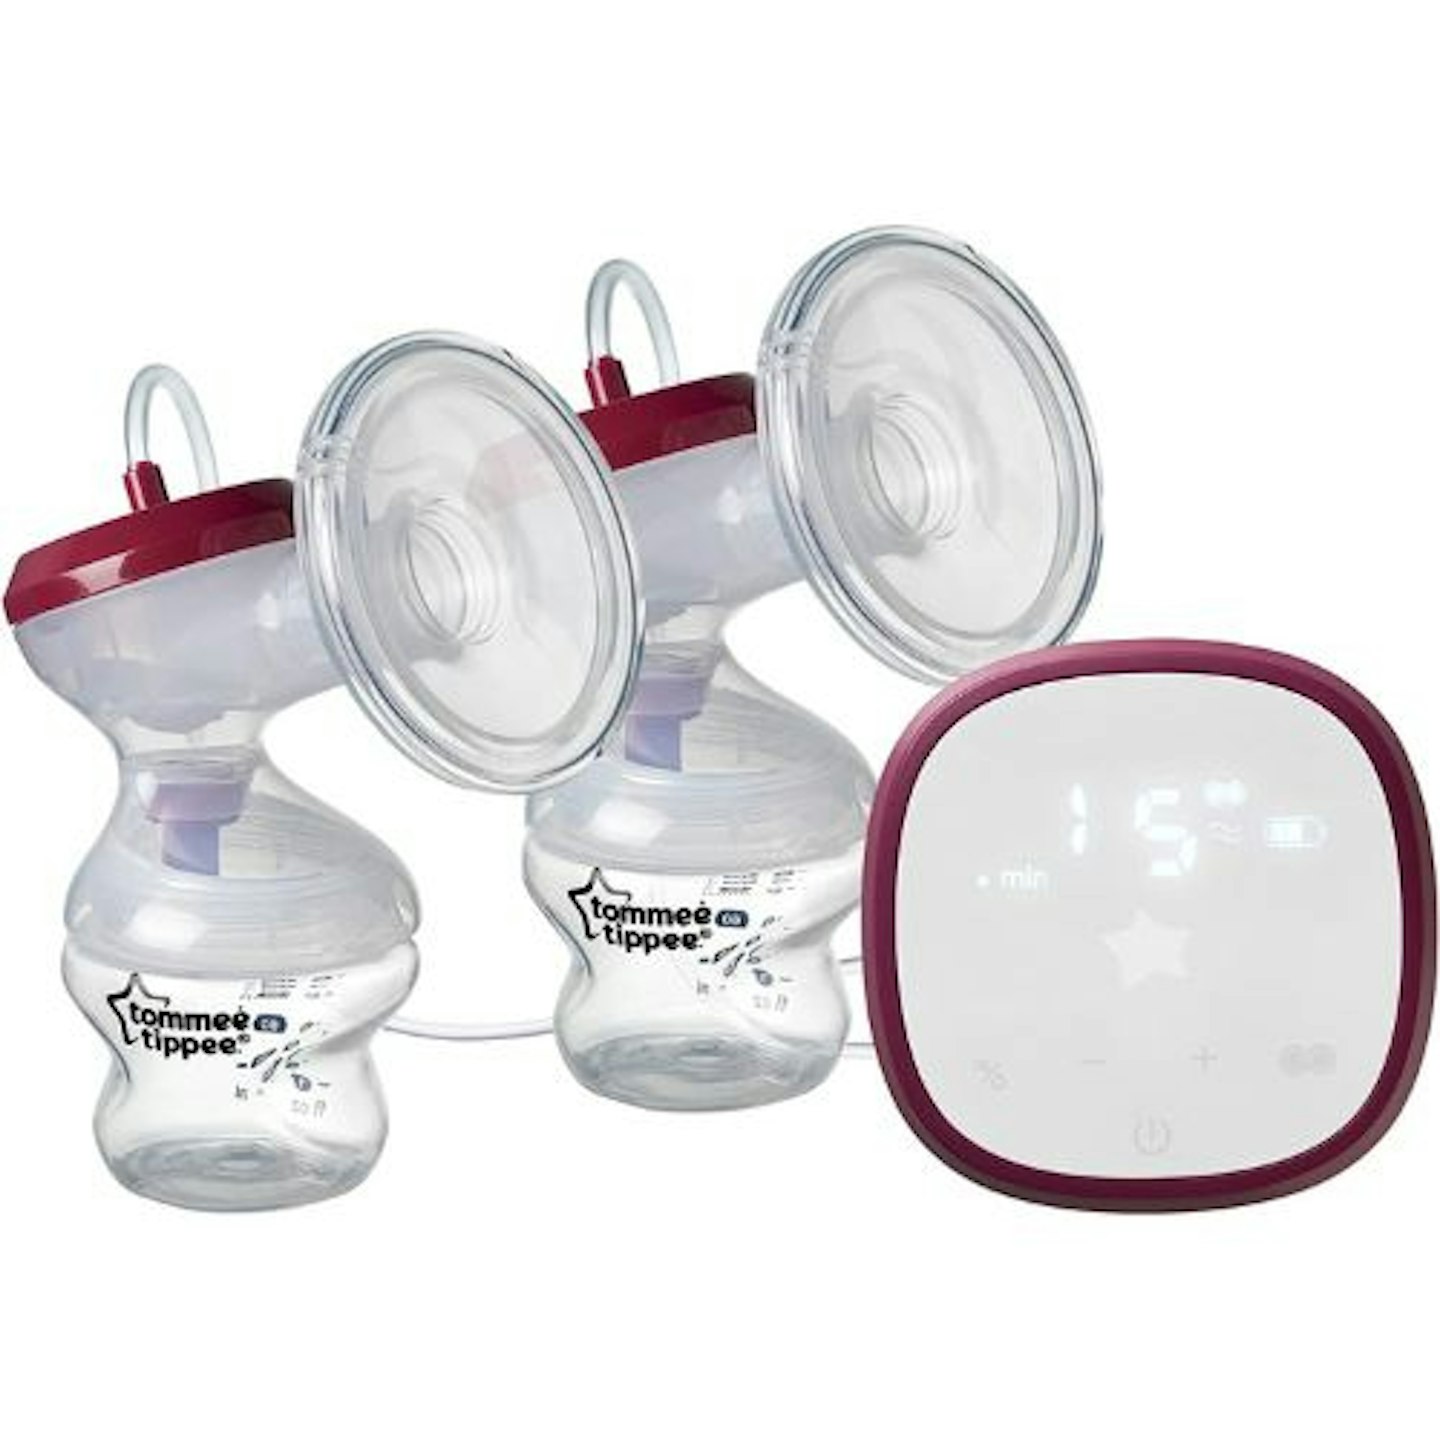 Tommee Tippee Double Electric Breast Pump